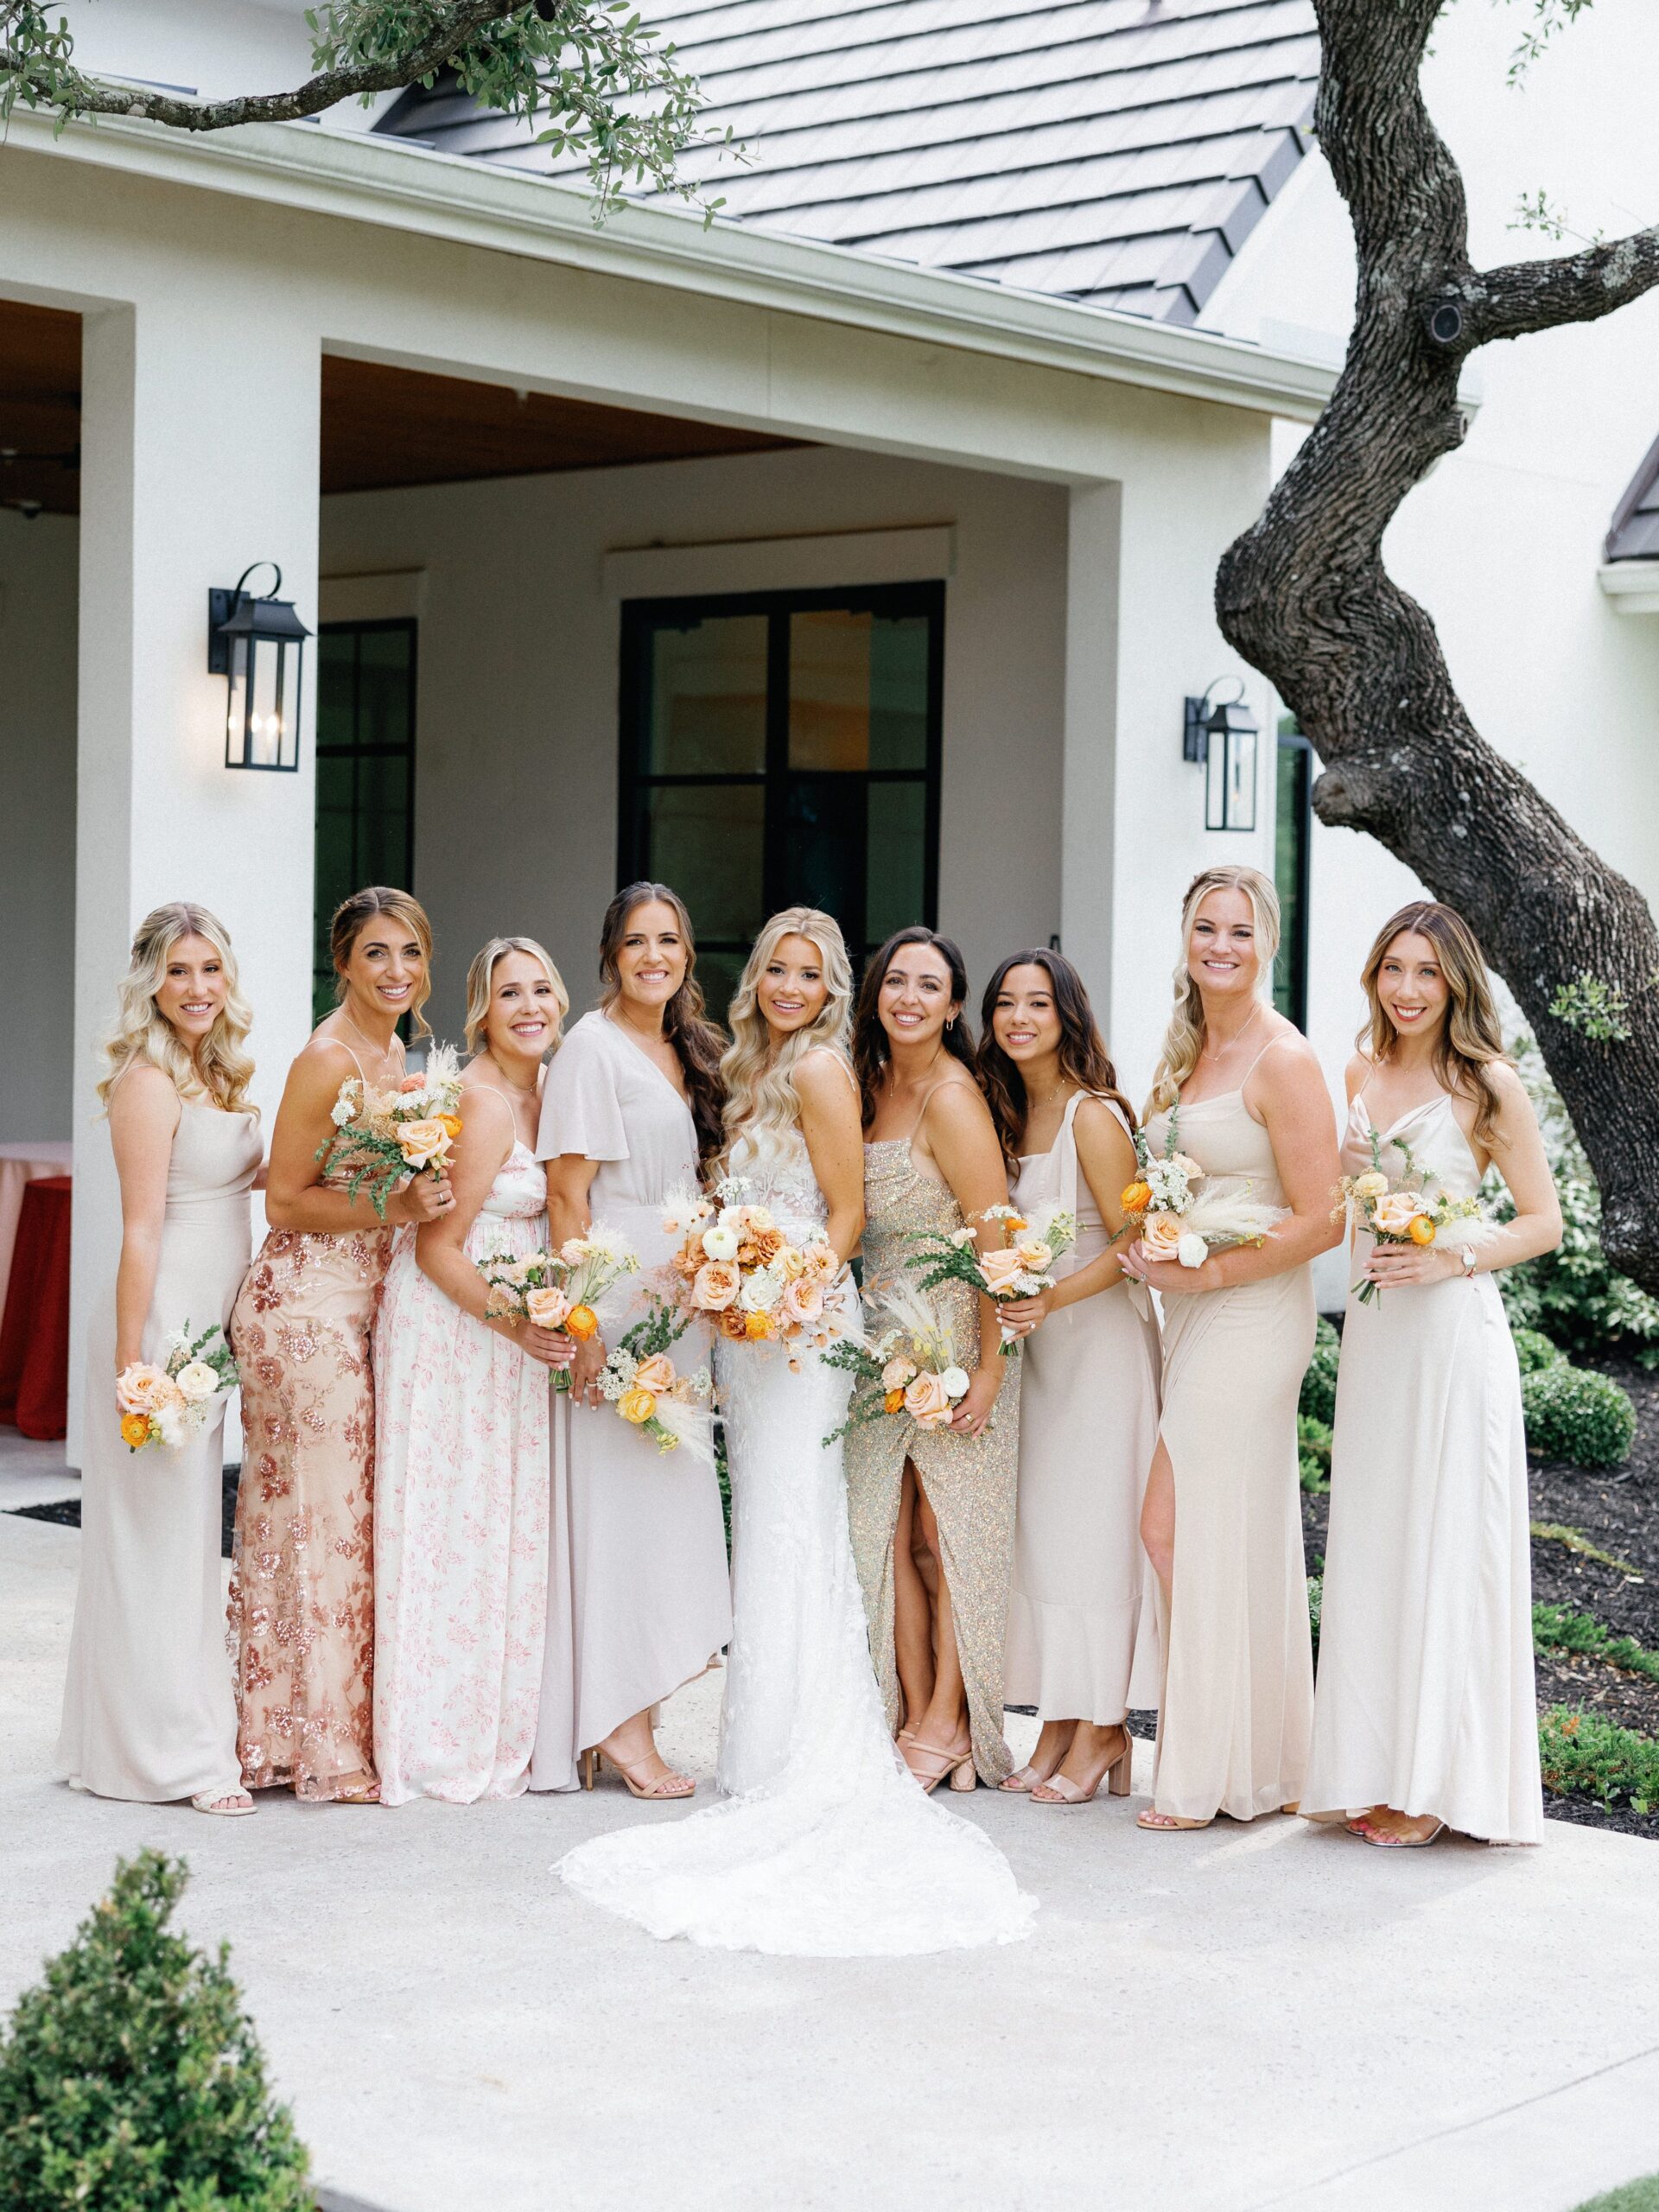 Bride with bridesmaids in neutral mismatched bridesmaid dresses